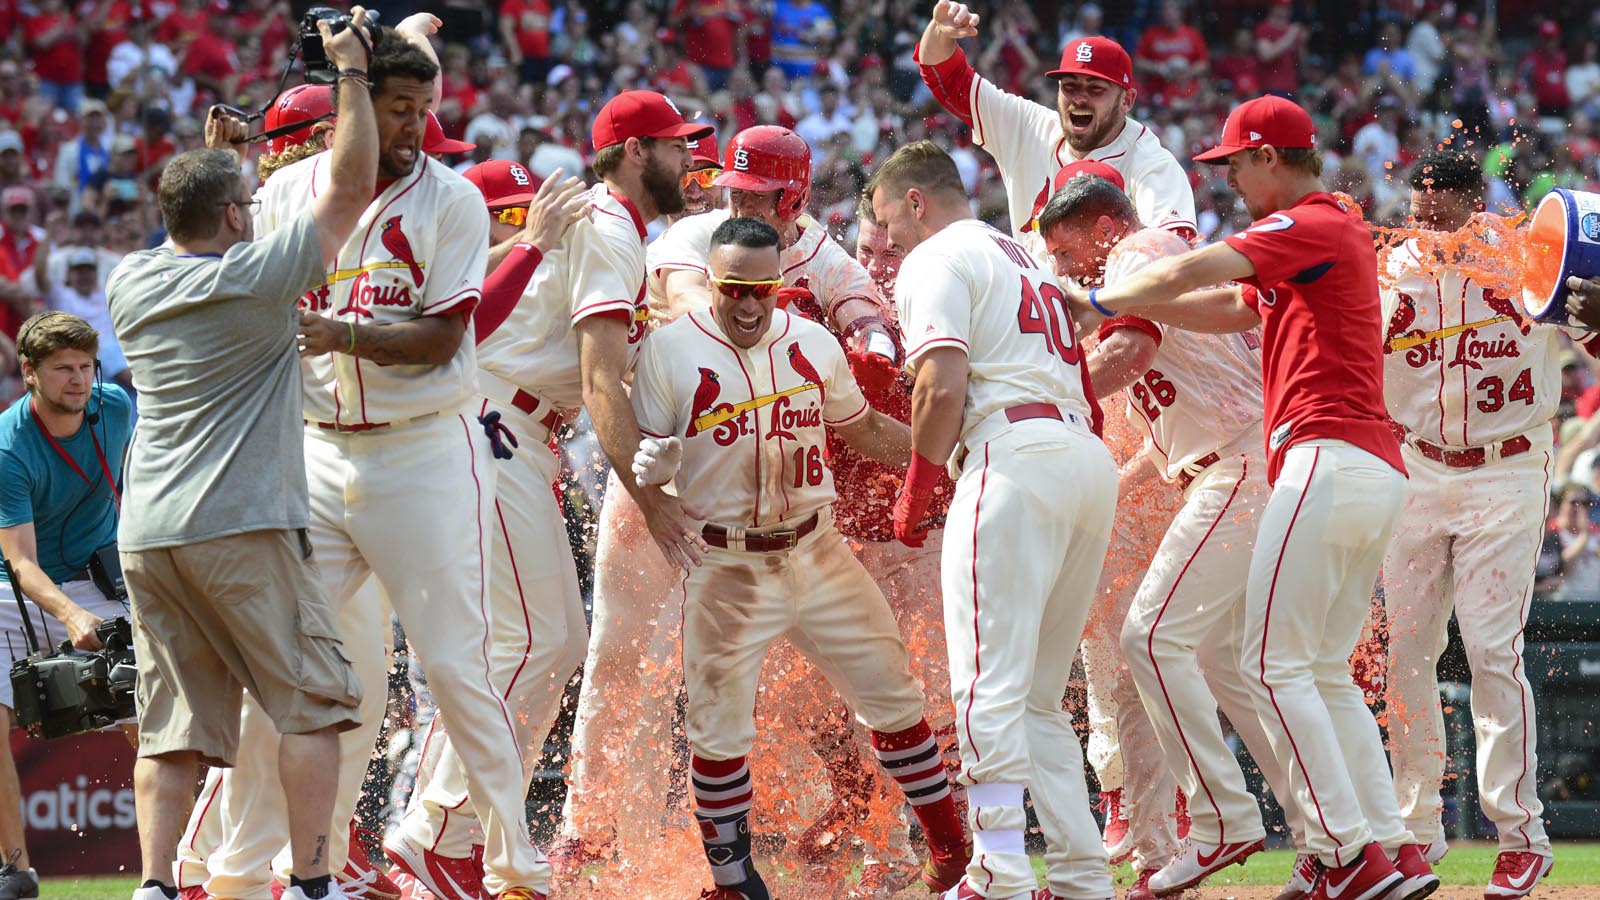 Wong's walk-off homer lifts Cardinals to 3-2 win over Pirates